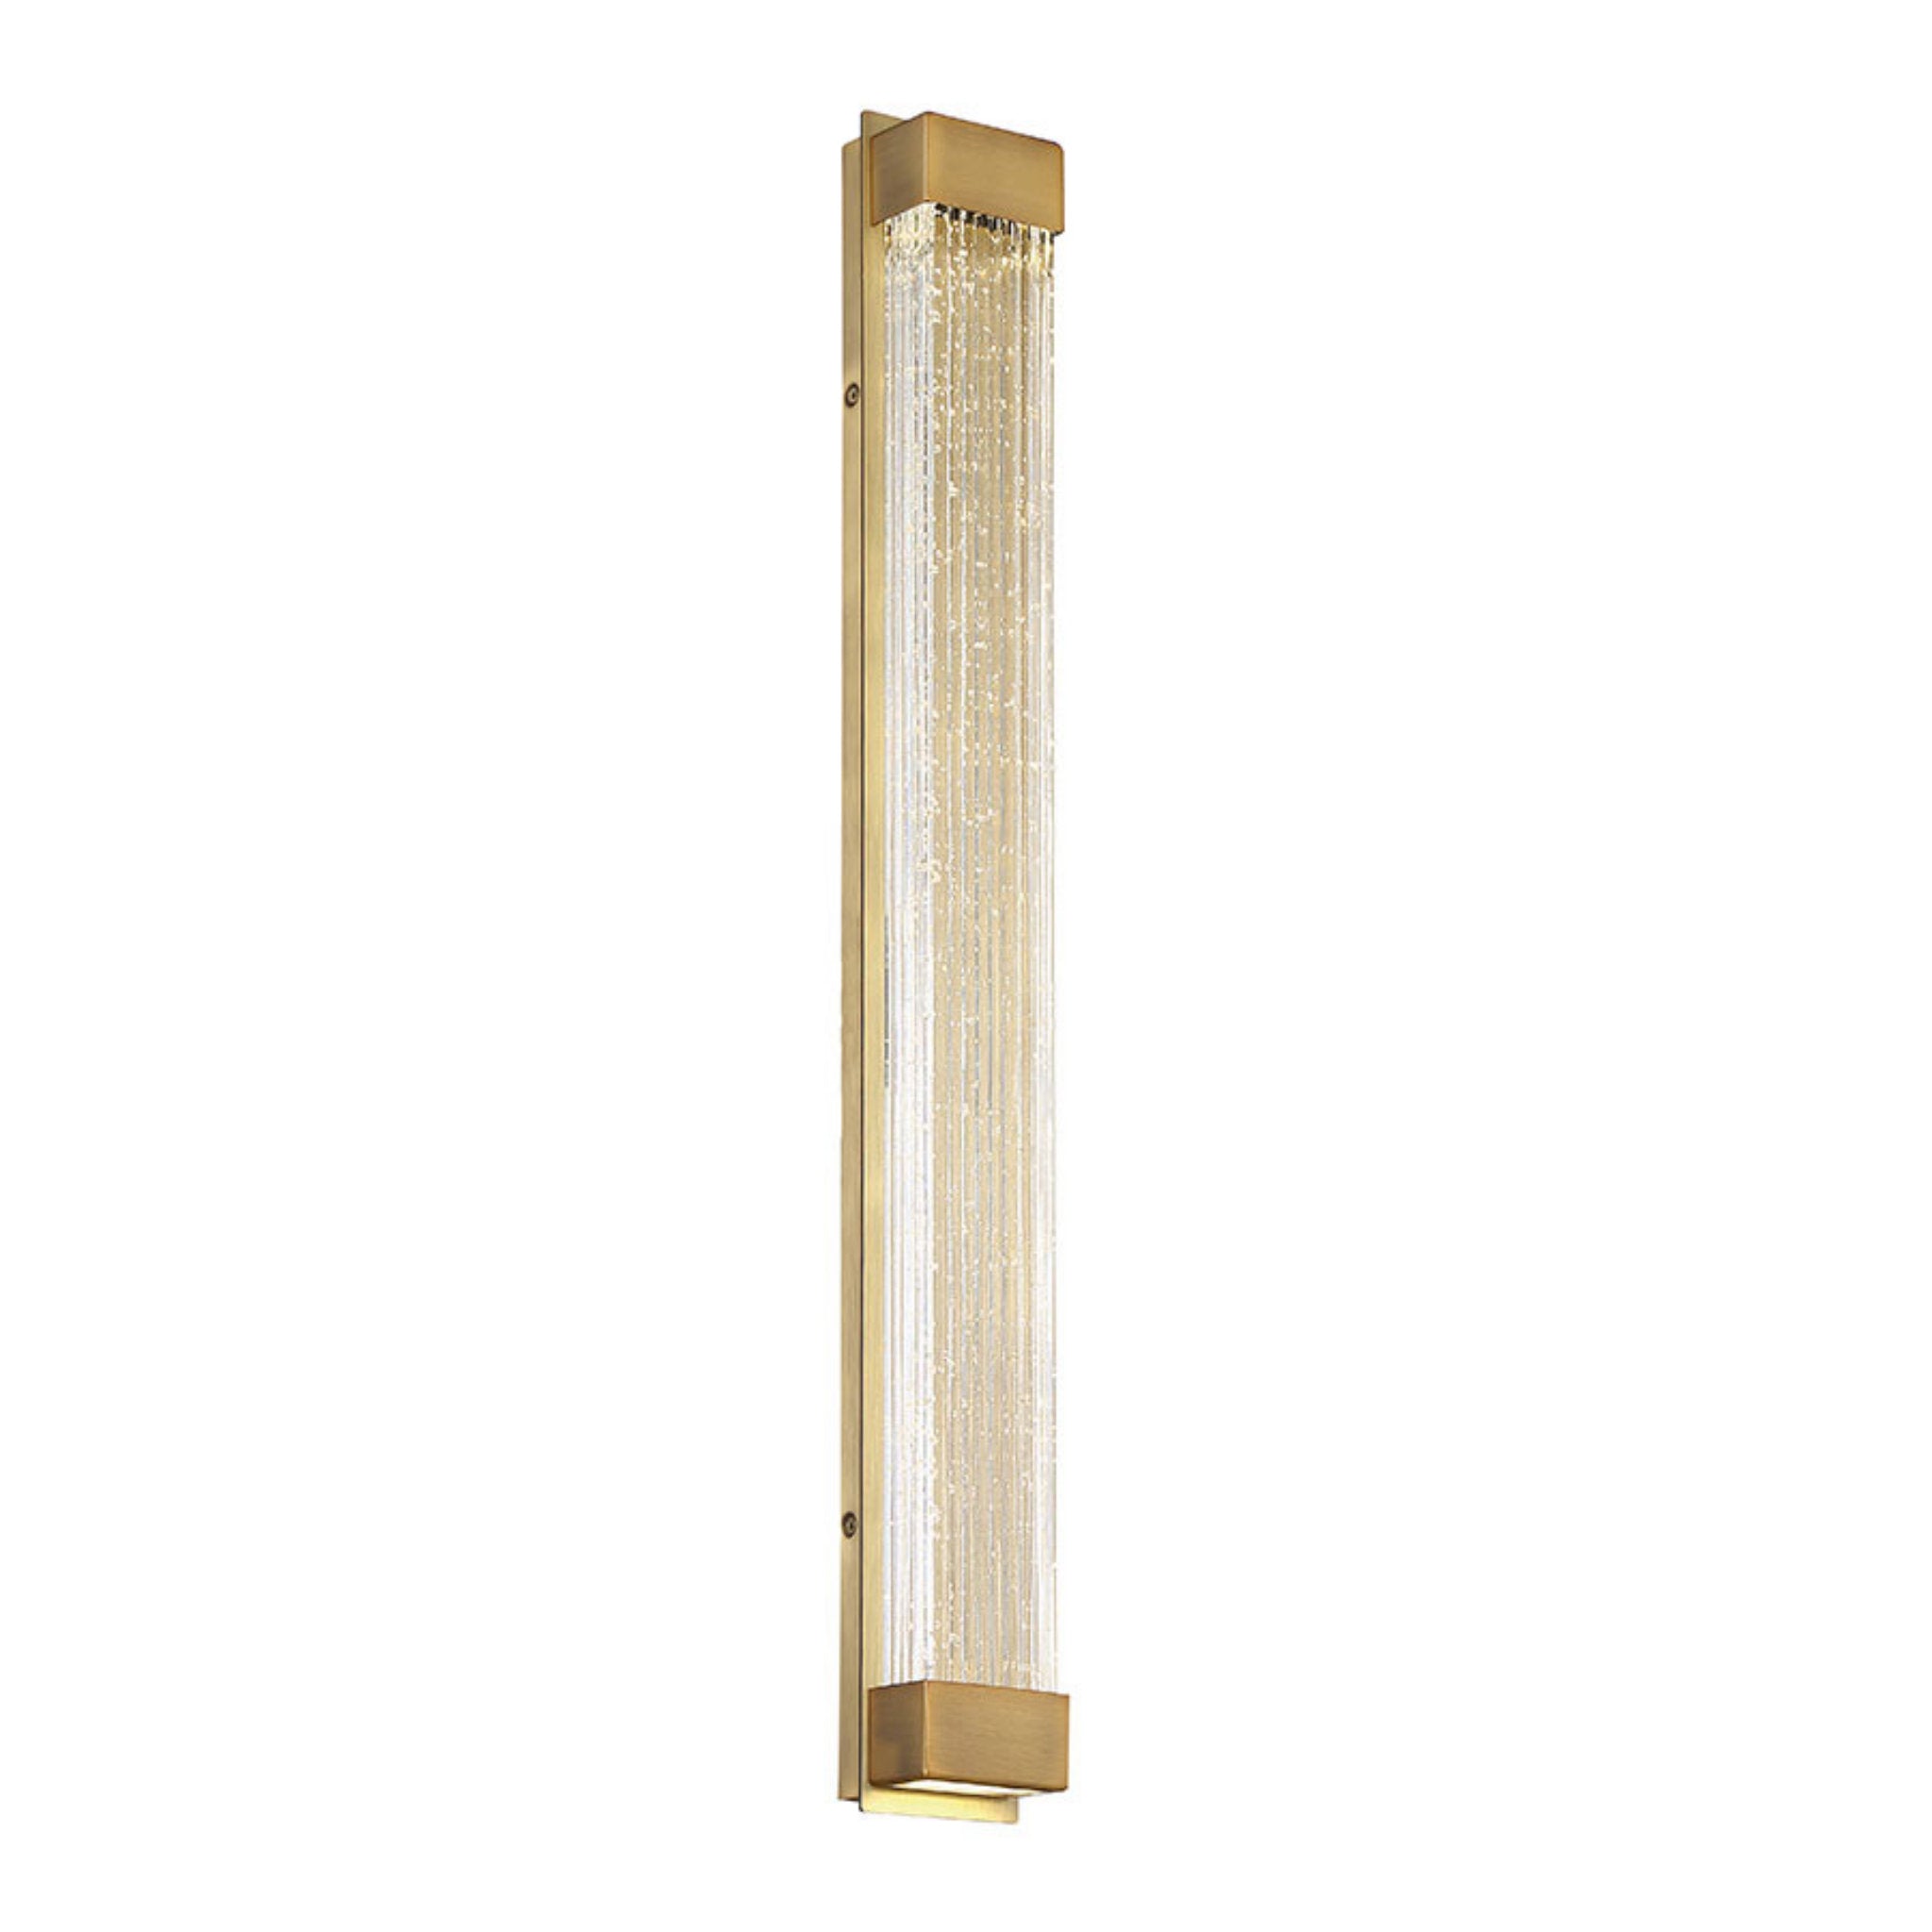 Modern Forms WS-58827-AB 3500K 16 Watt Tower LED Wall Sconce in Aged Brass